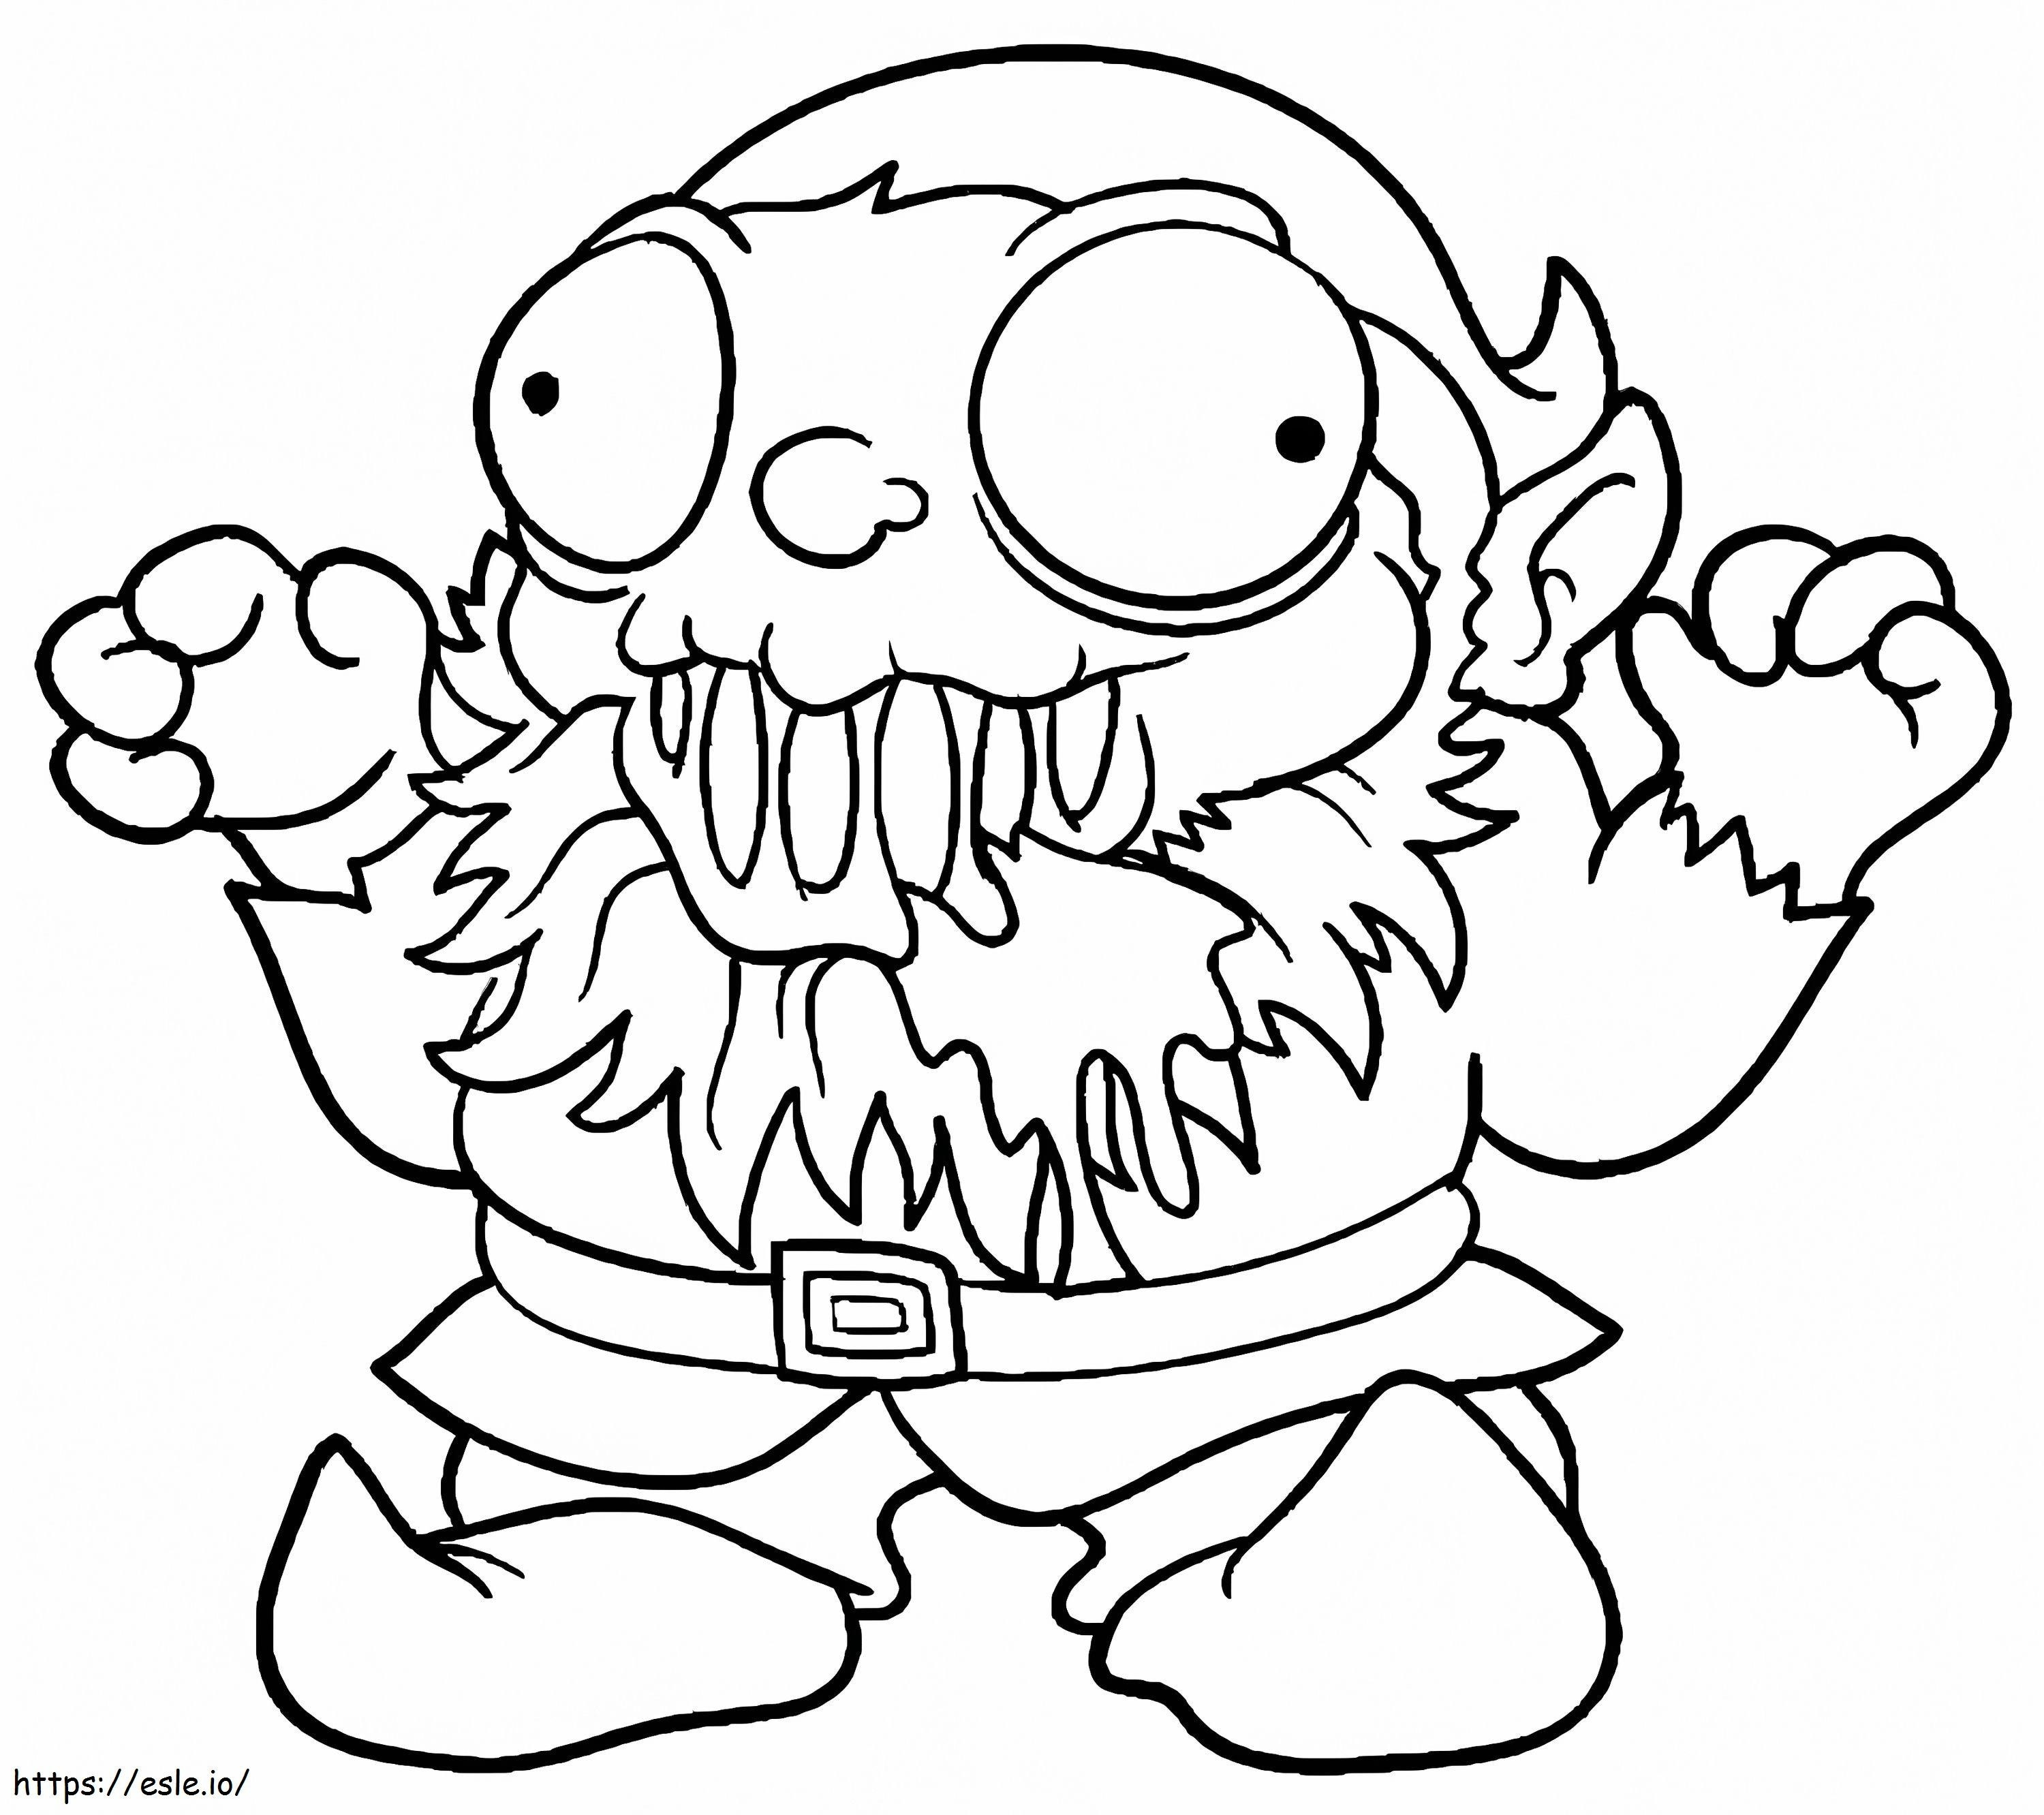 Manglez Garden Gnome Trash Pack coloring page